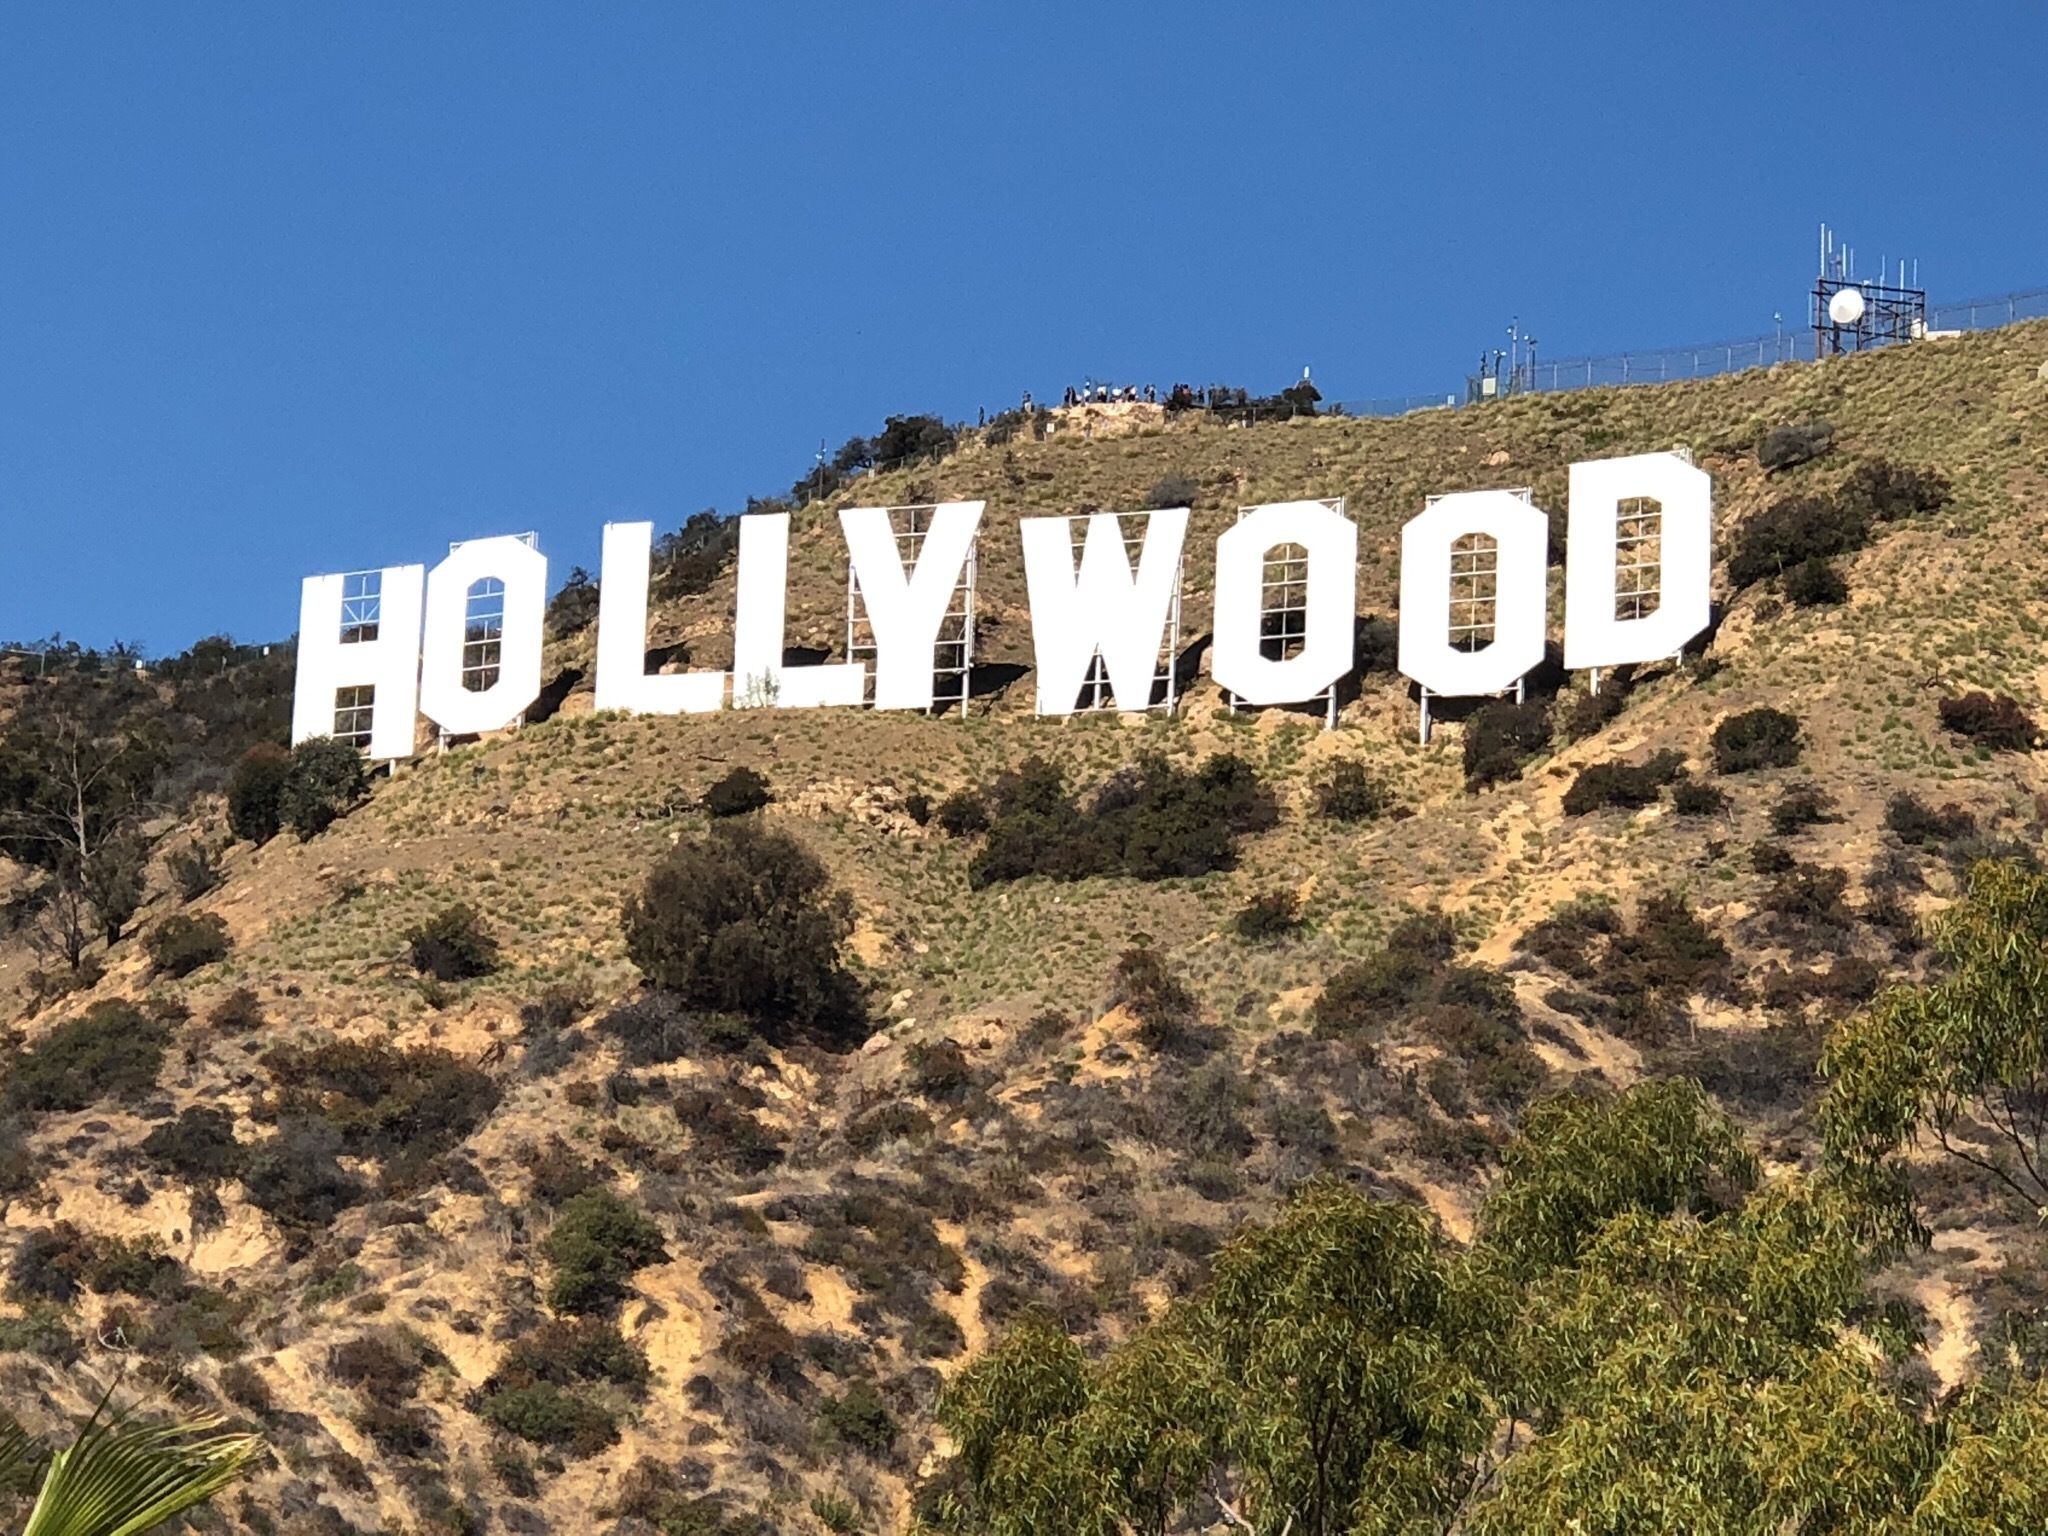 Load More - Hollywood Sign , HD Wallpaper & Backgrounds